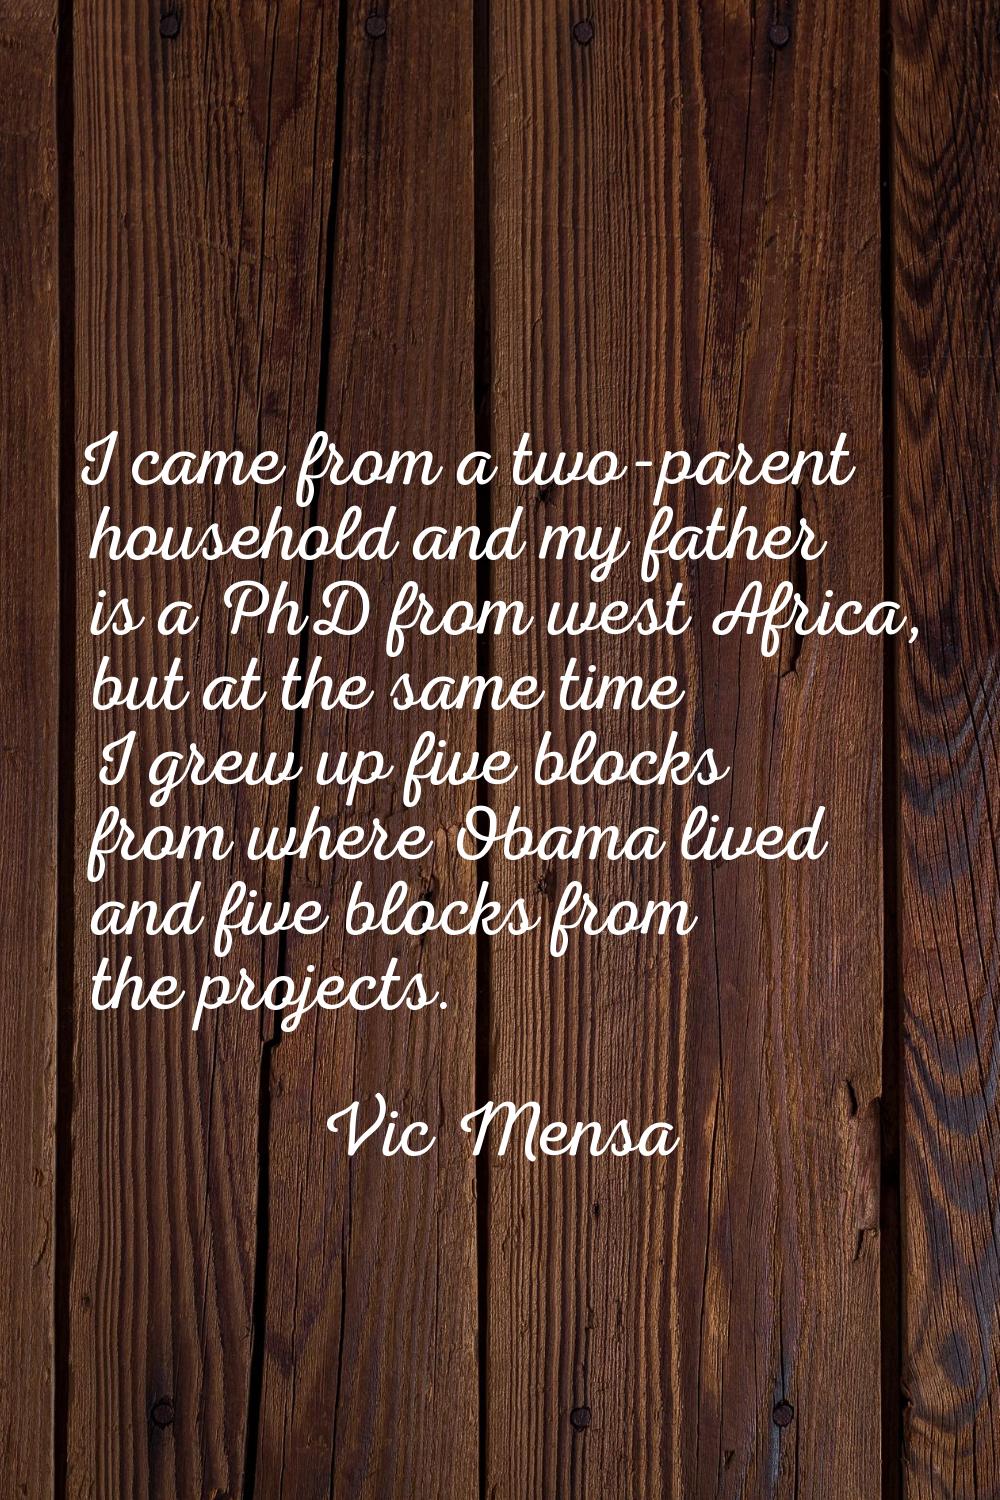 I came from a two-parent household and my father is a PhD from west Africa, but at the same time I 